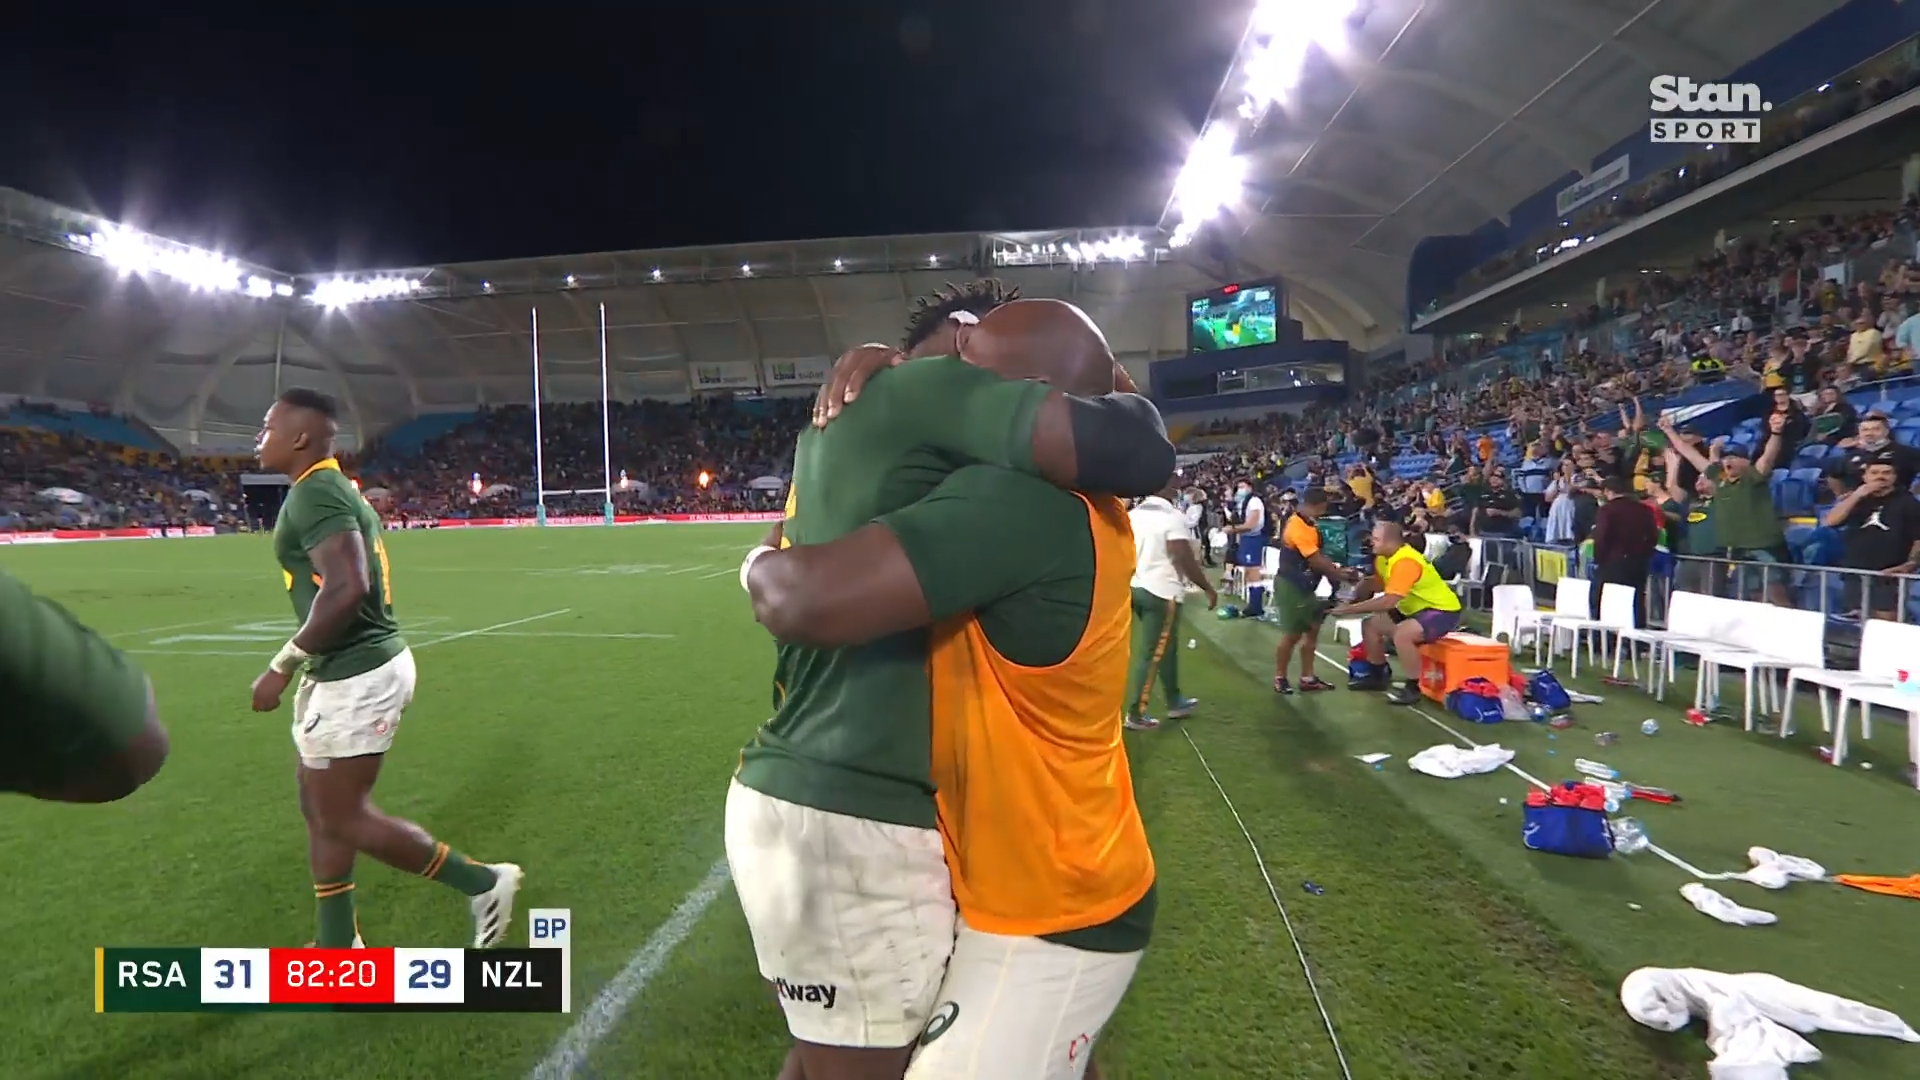 Emotional Springboks win all-time classic